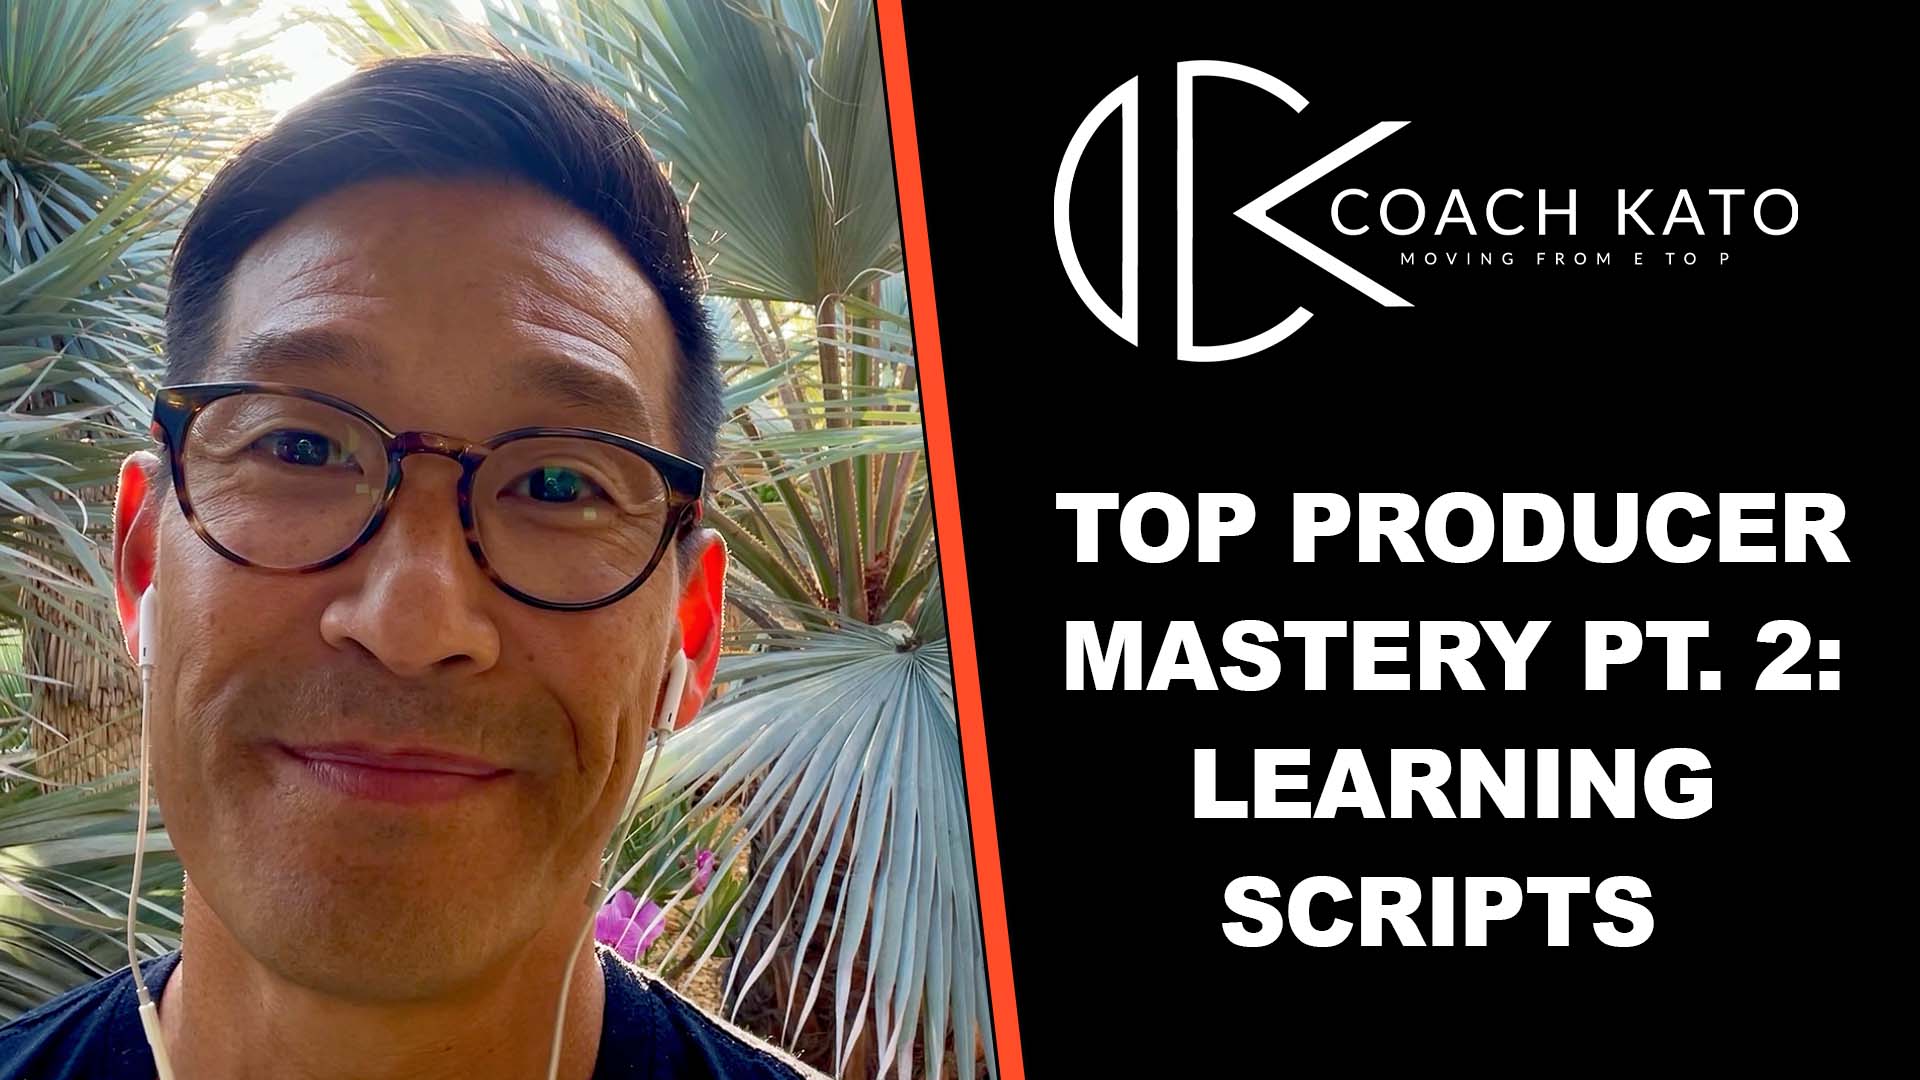 Why Learning Scripts Is So Important